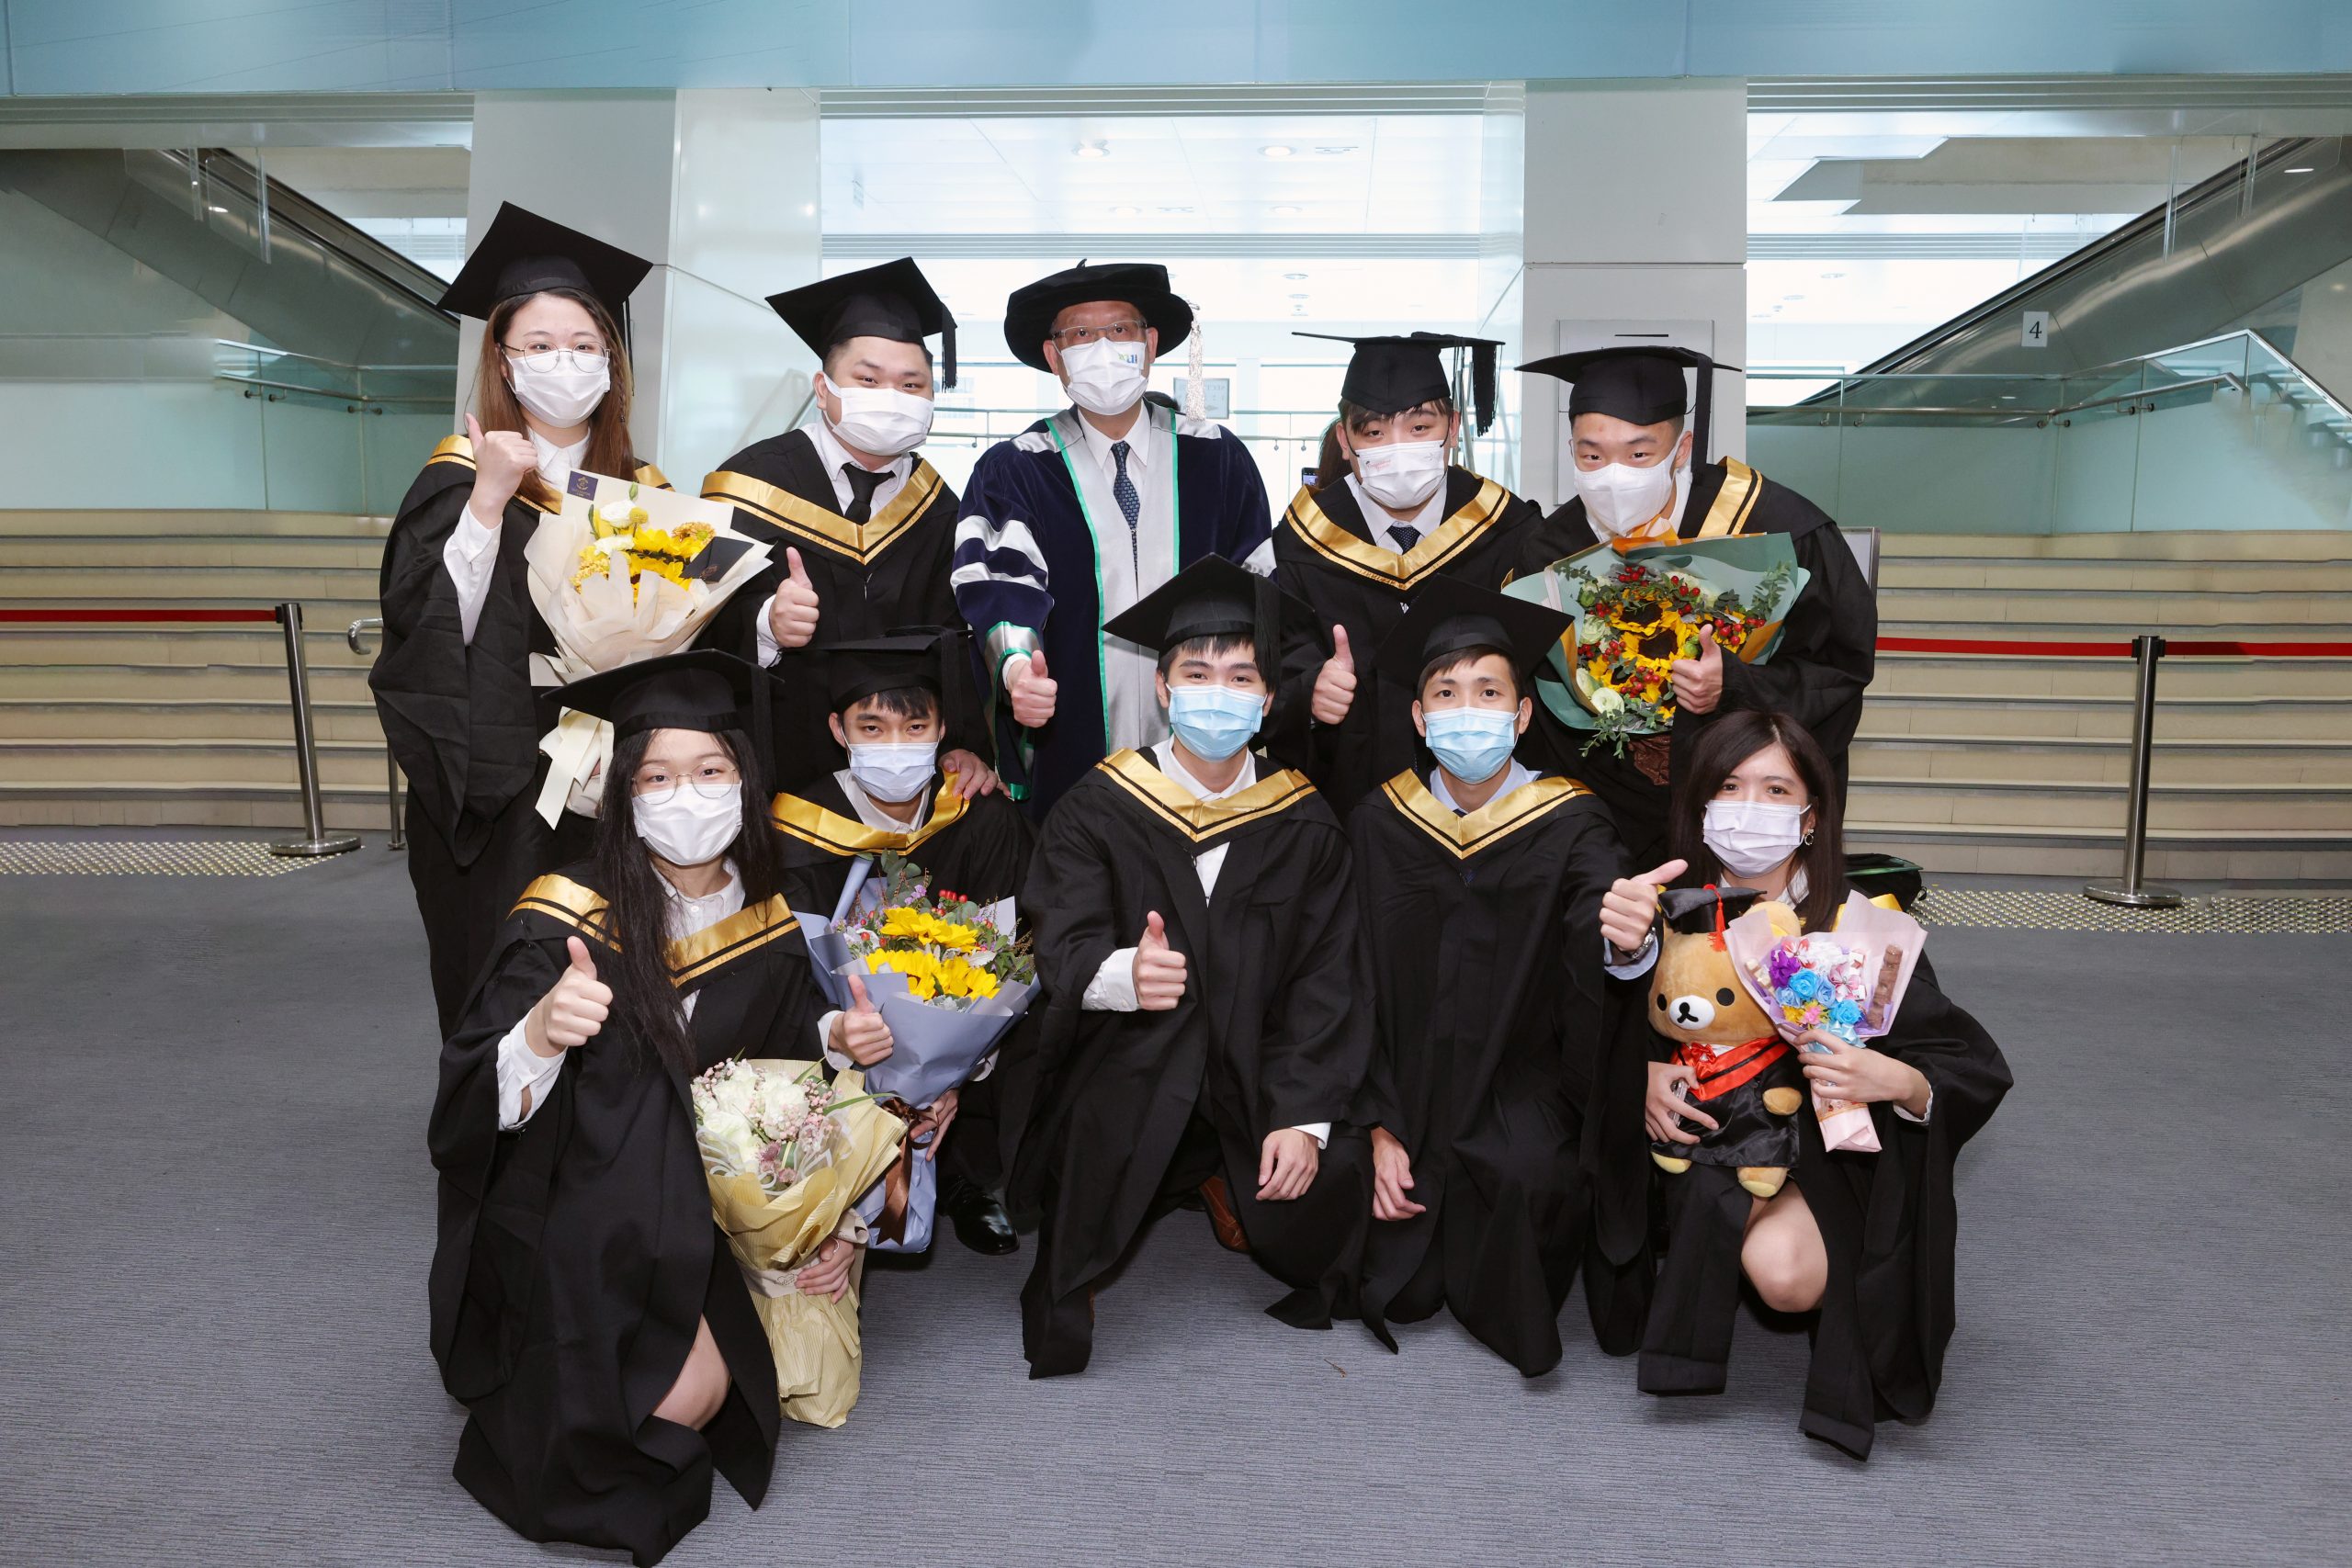 A new chapter for the graduates of HKMU.